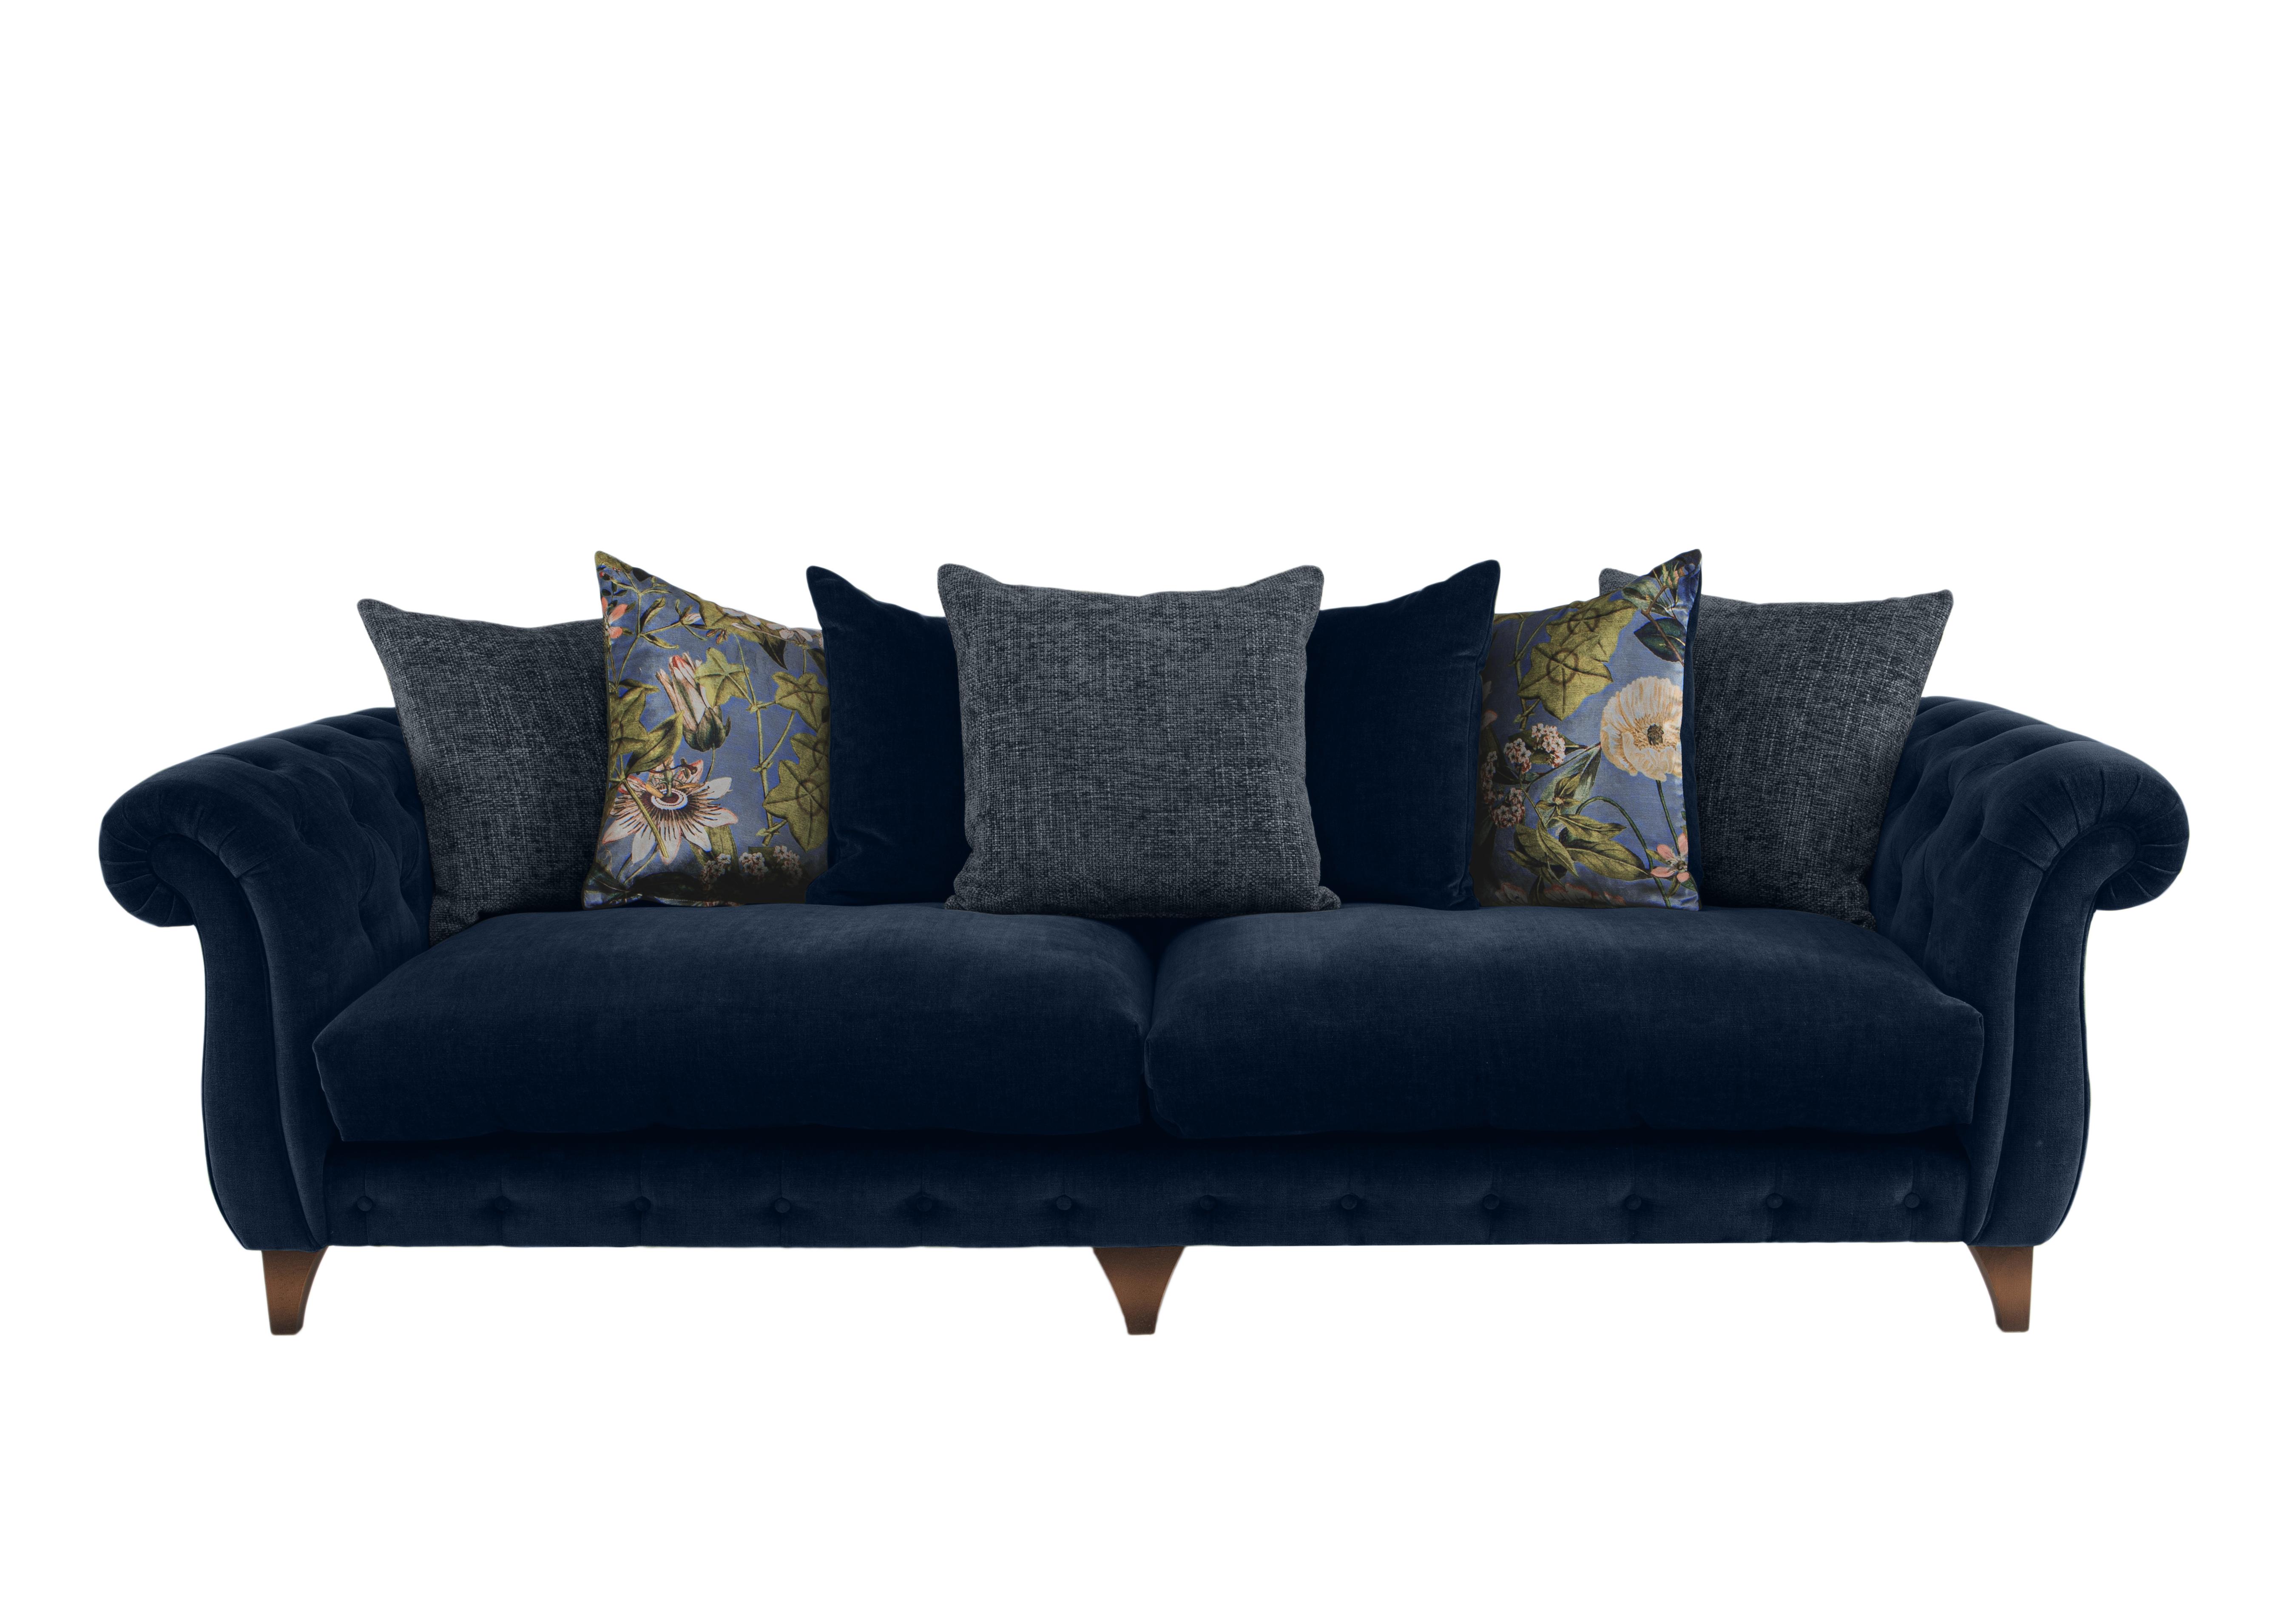 Boutique Palace Fabric Grande Scatter Back Sofa in Oasis Navy on Furniture Village